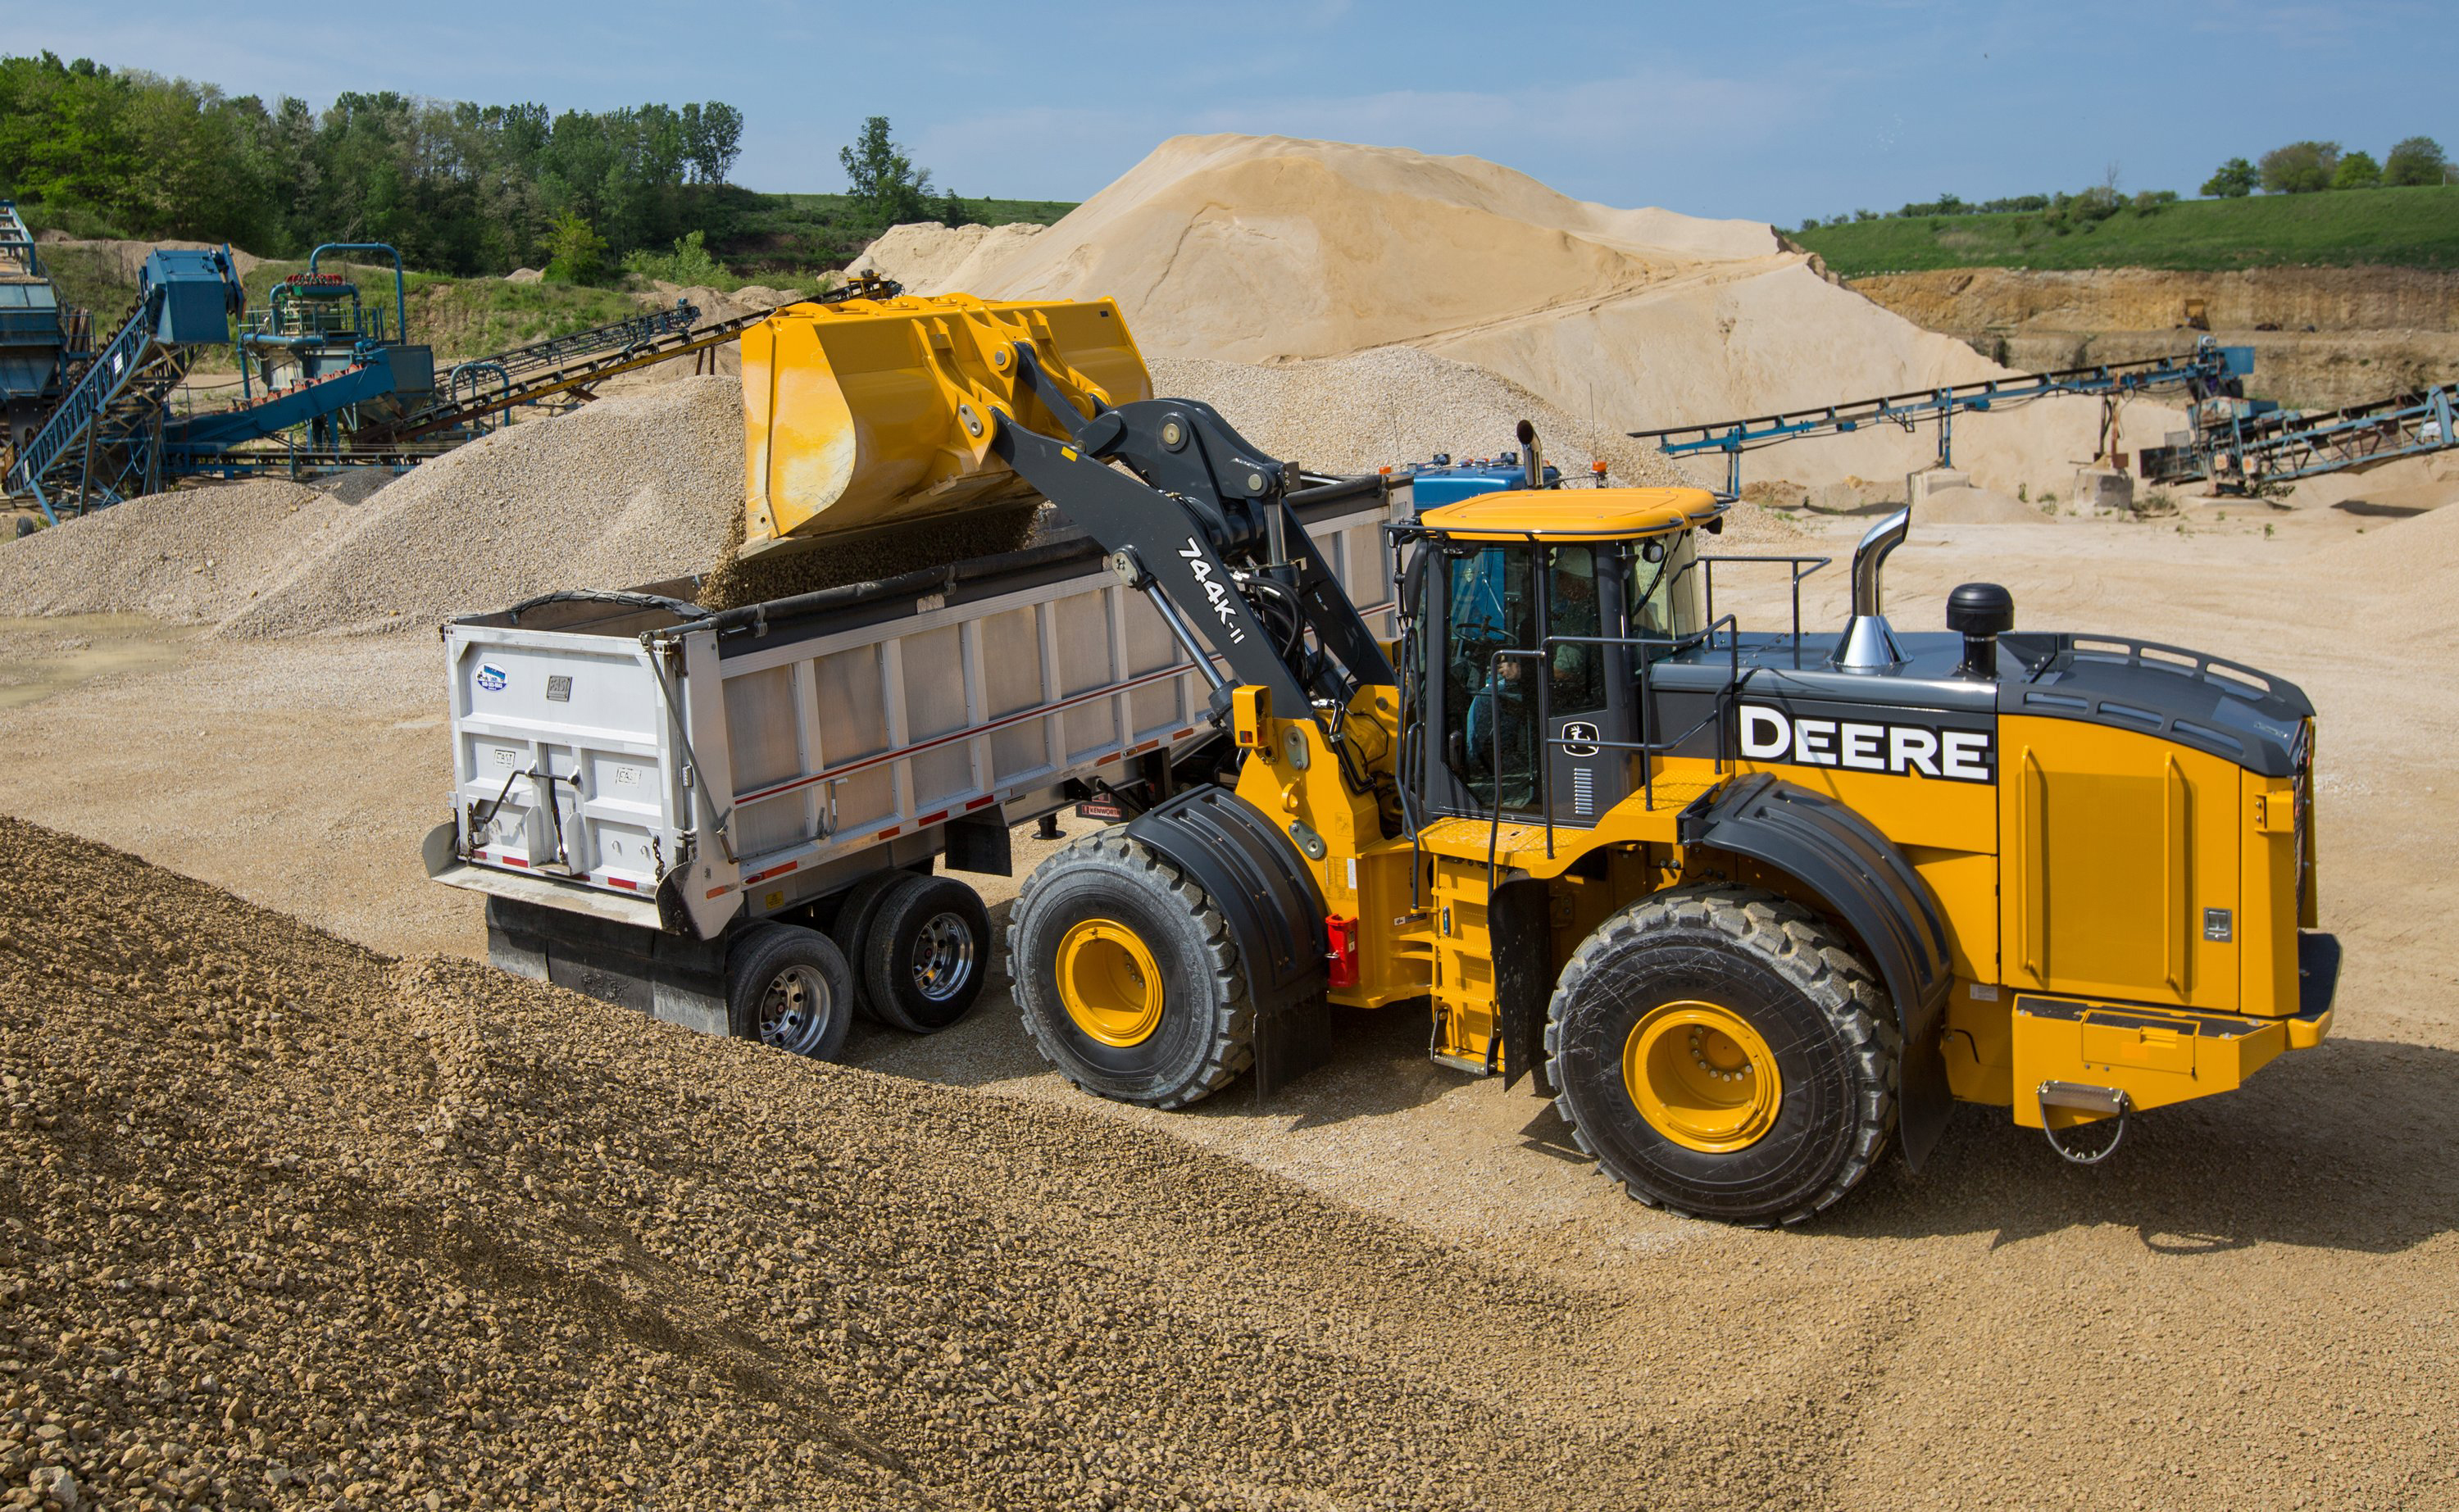 Digging Into the Details of the Latest John Deere Bucket ...